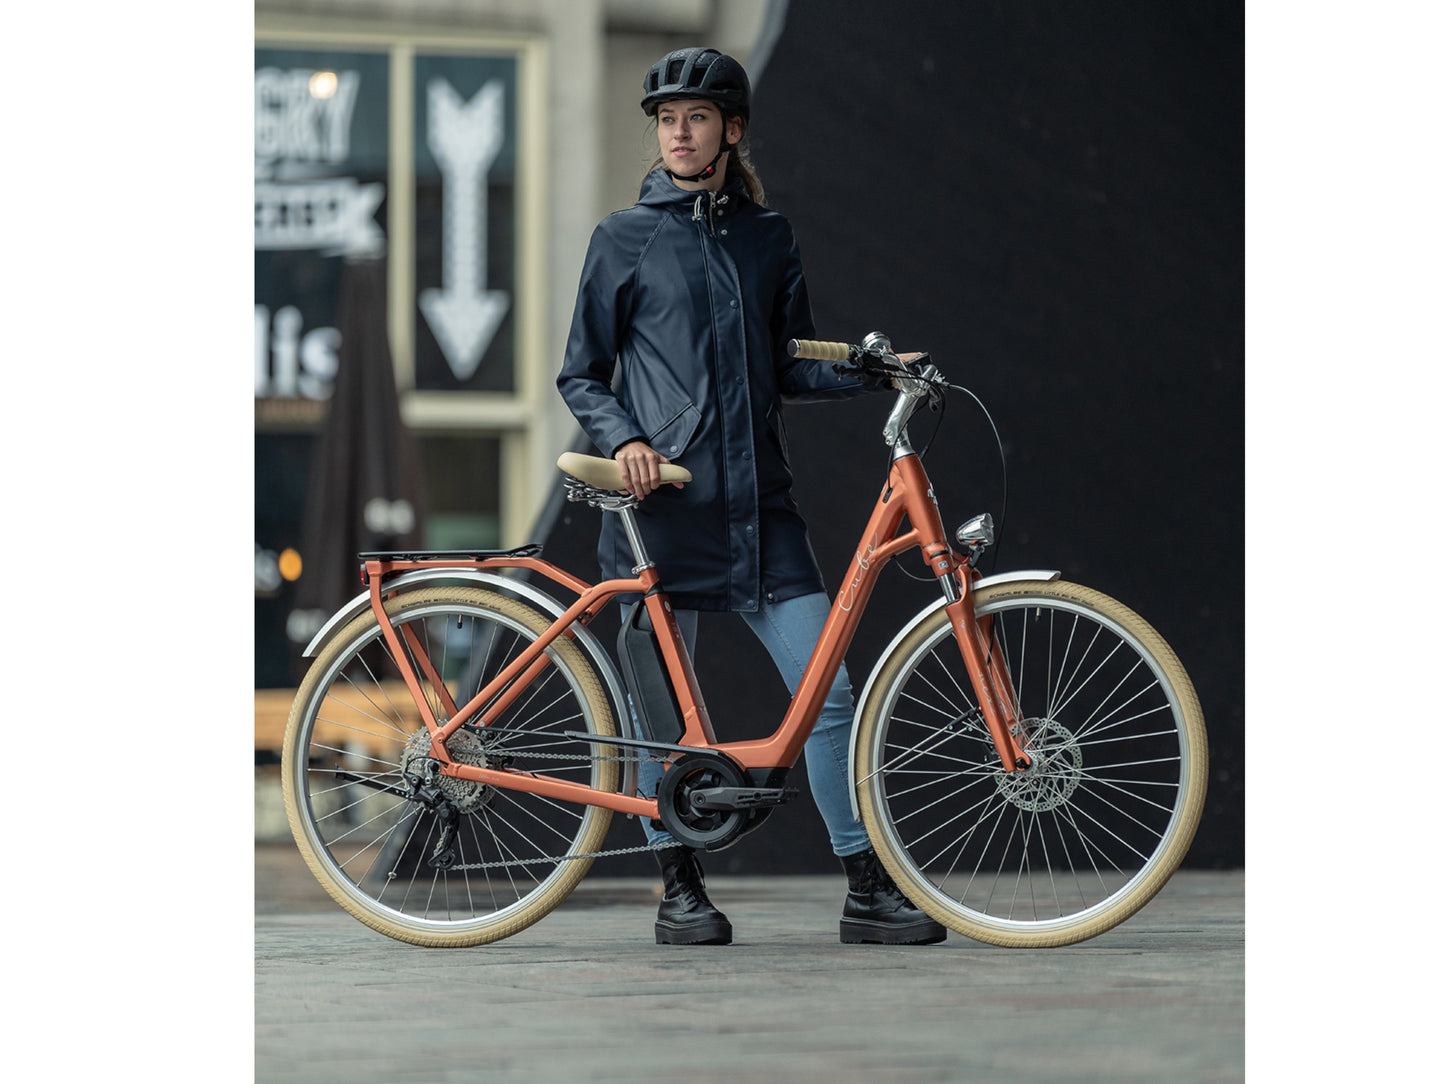 Cube Ella Ride Hybrid 500 eMTB hardtail woman standing with bike in city